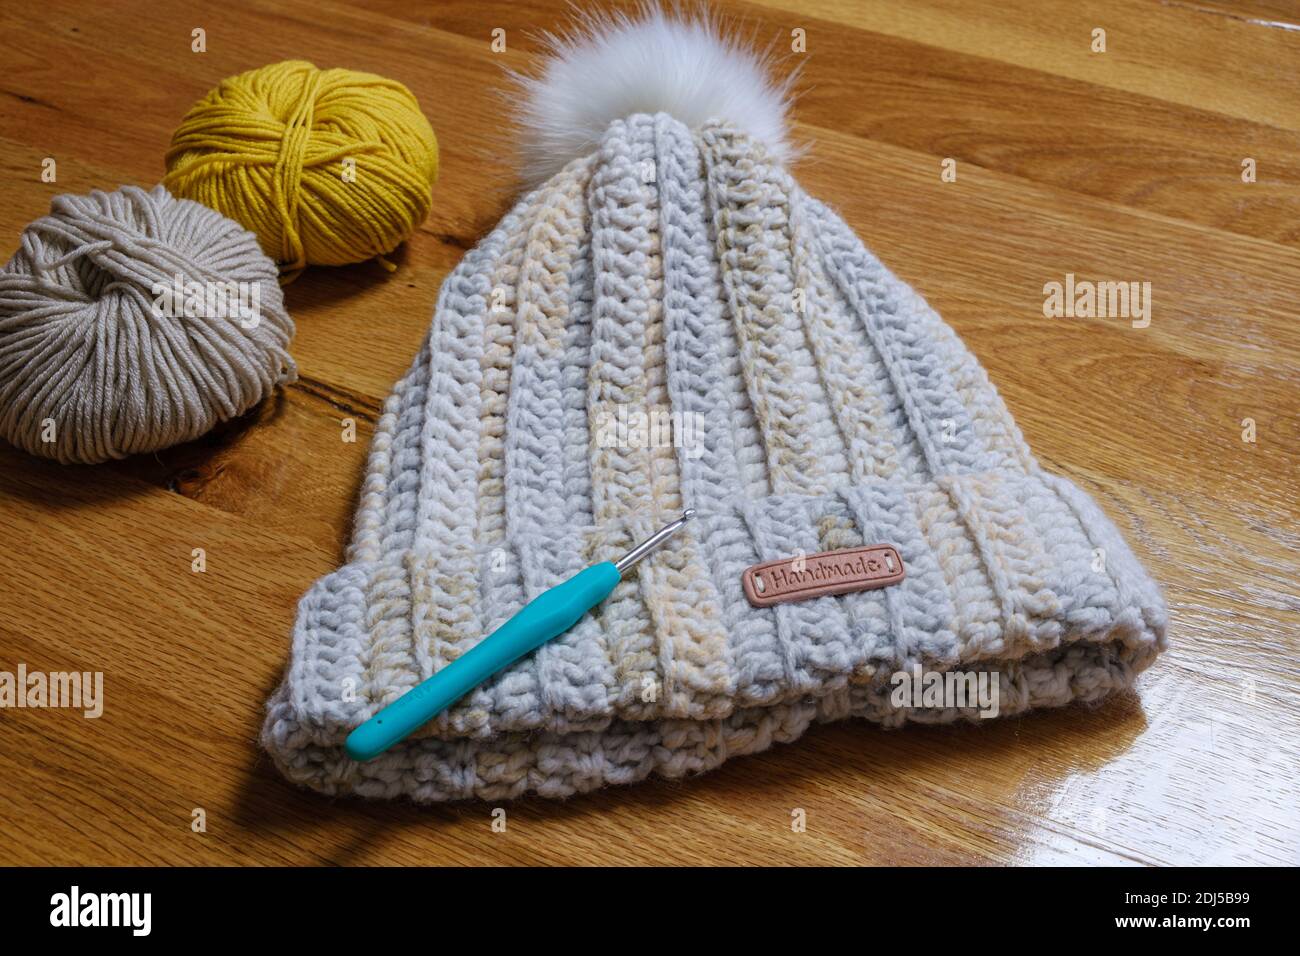 Handmade wool bobble hat on a wooden table with crochet hook and ball of wool. Stock Photo